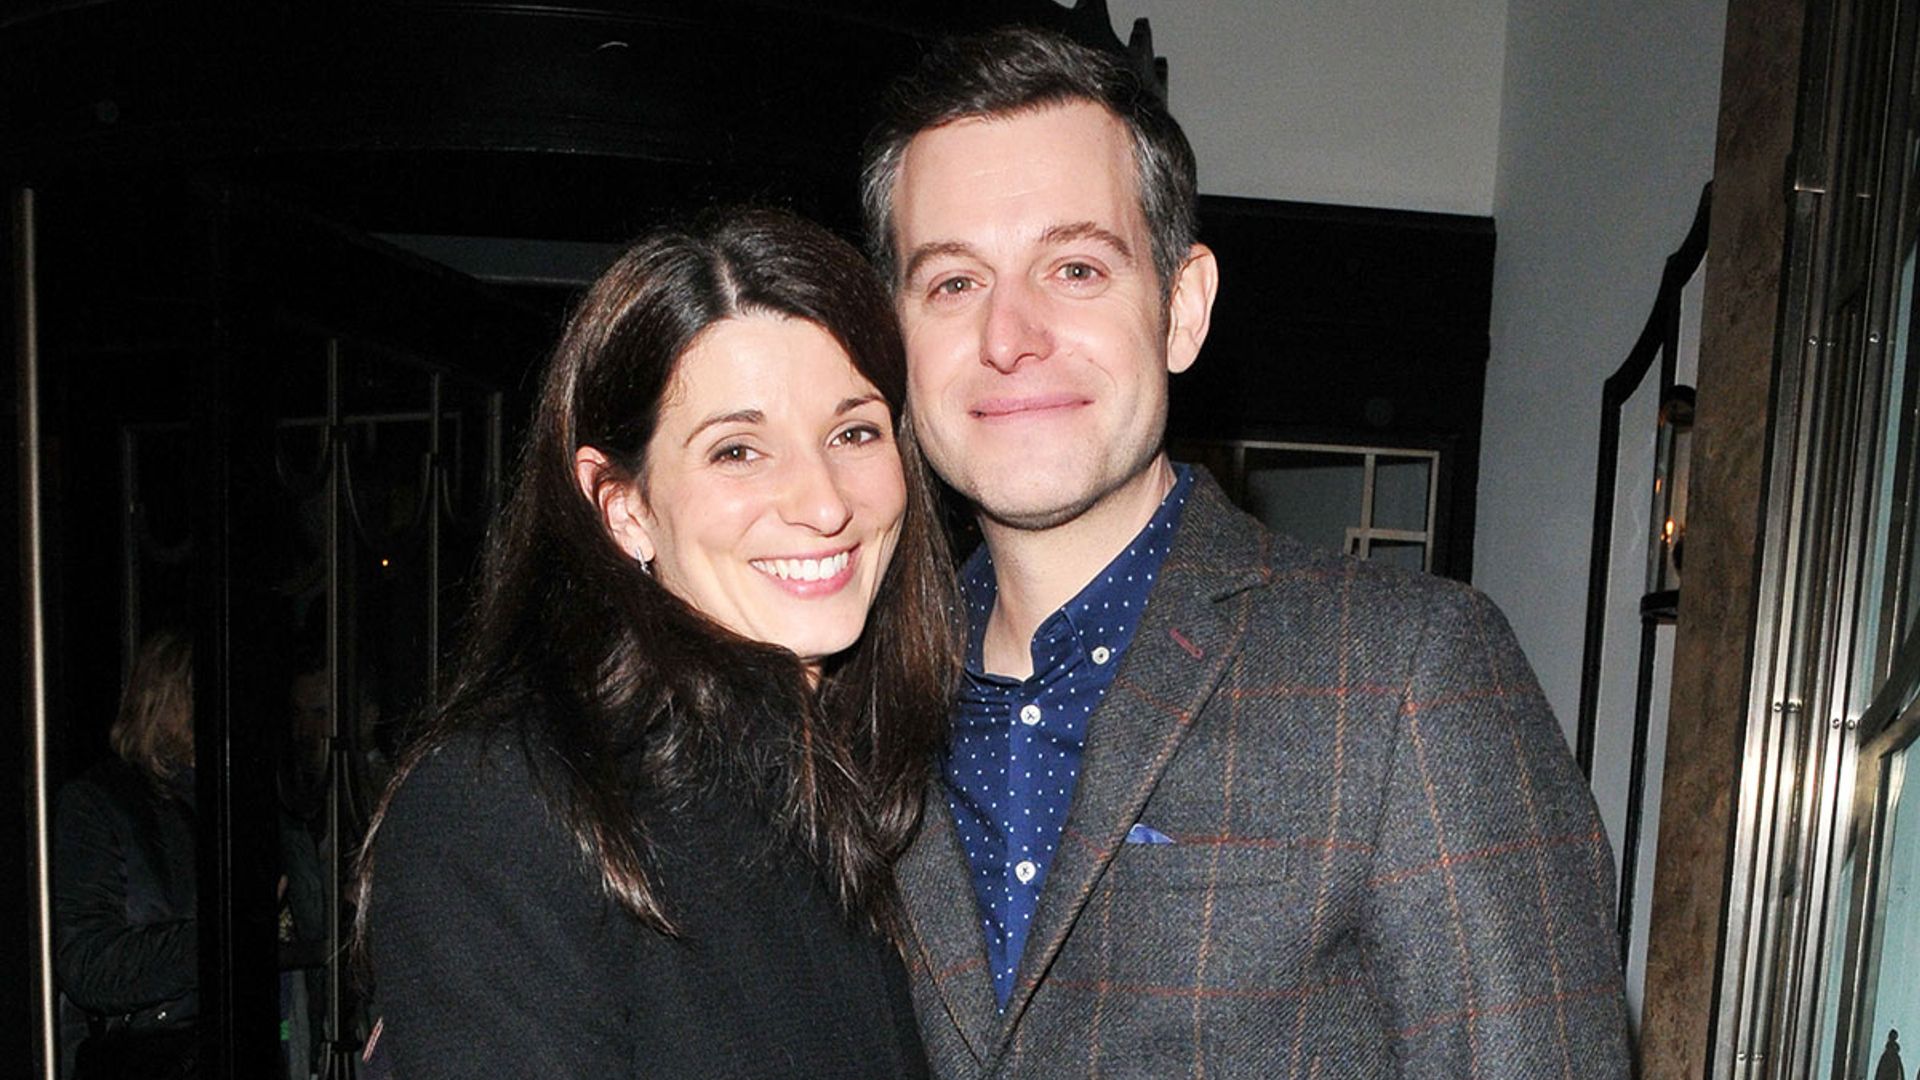 Matt Baker and his wife share exciting family news